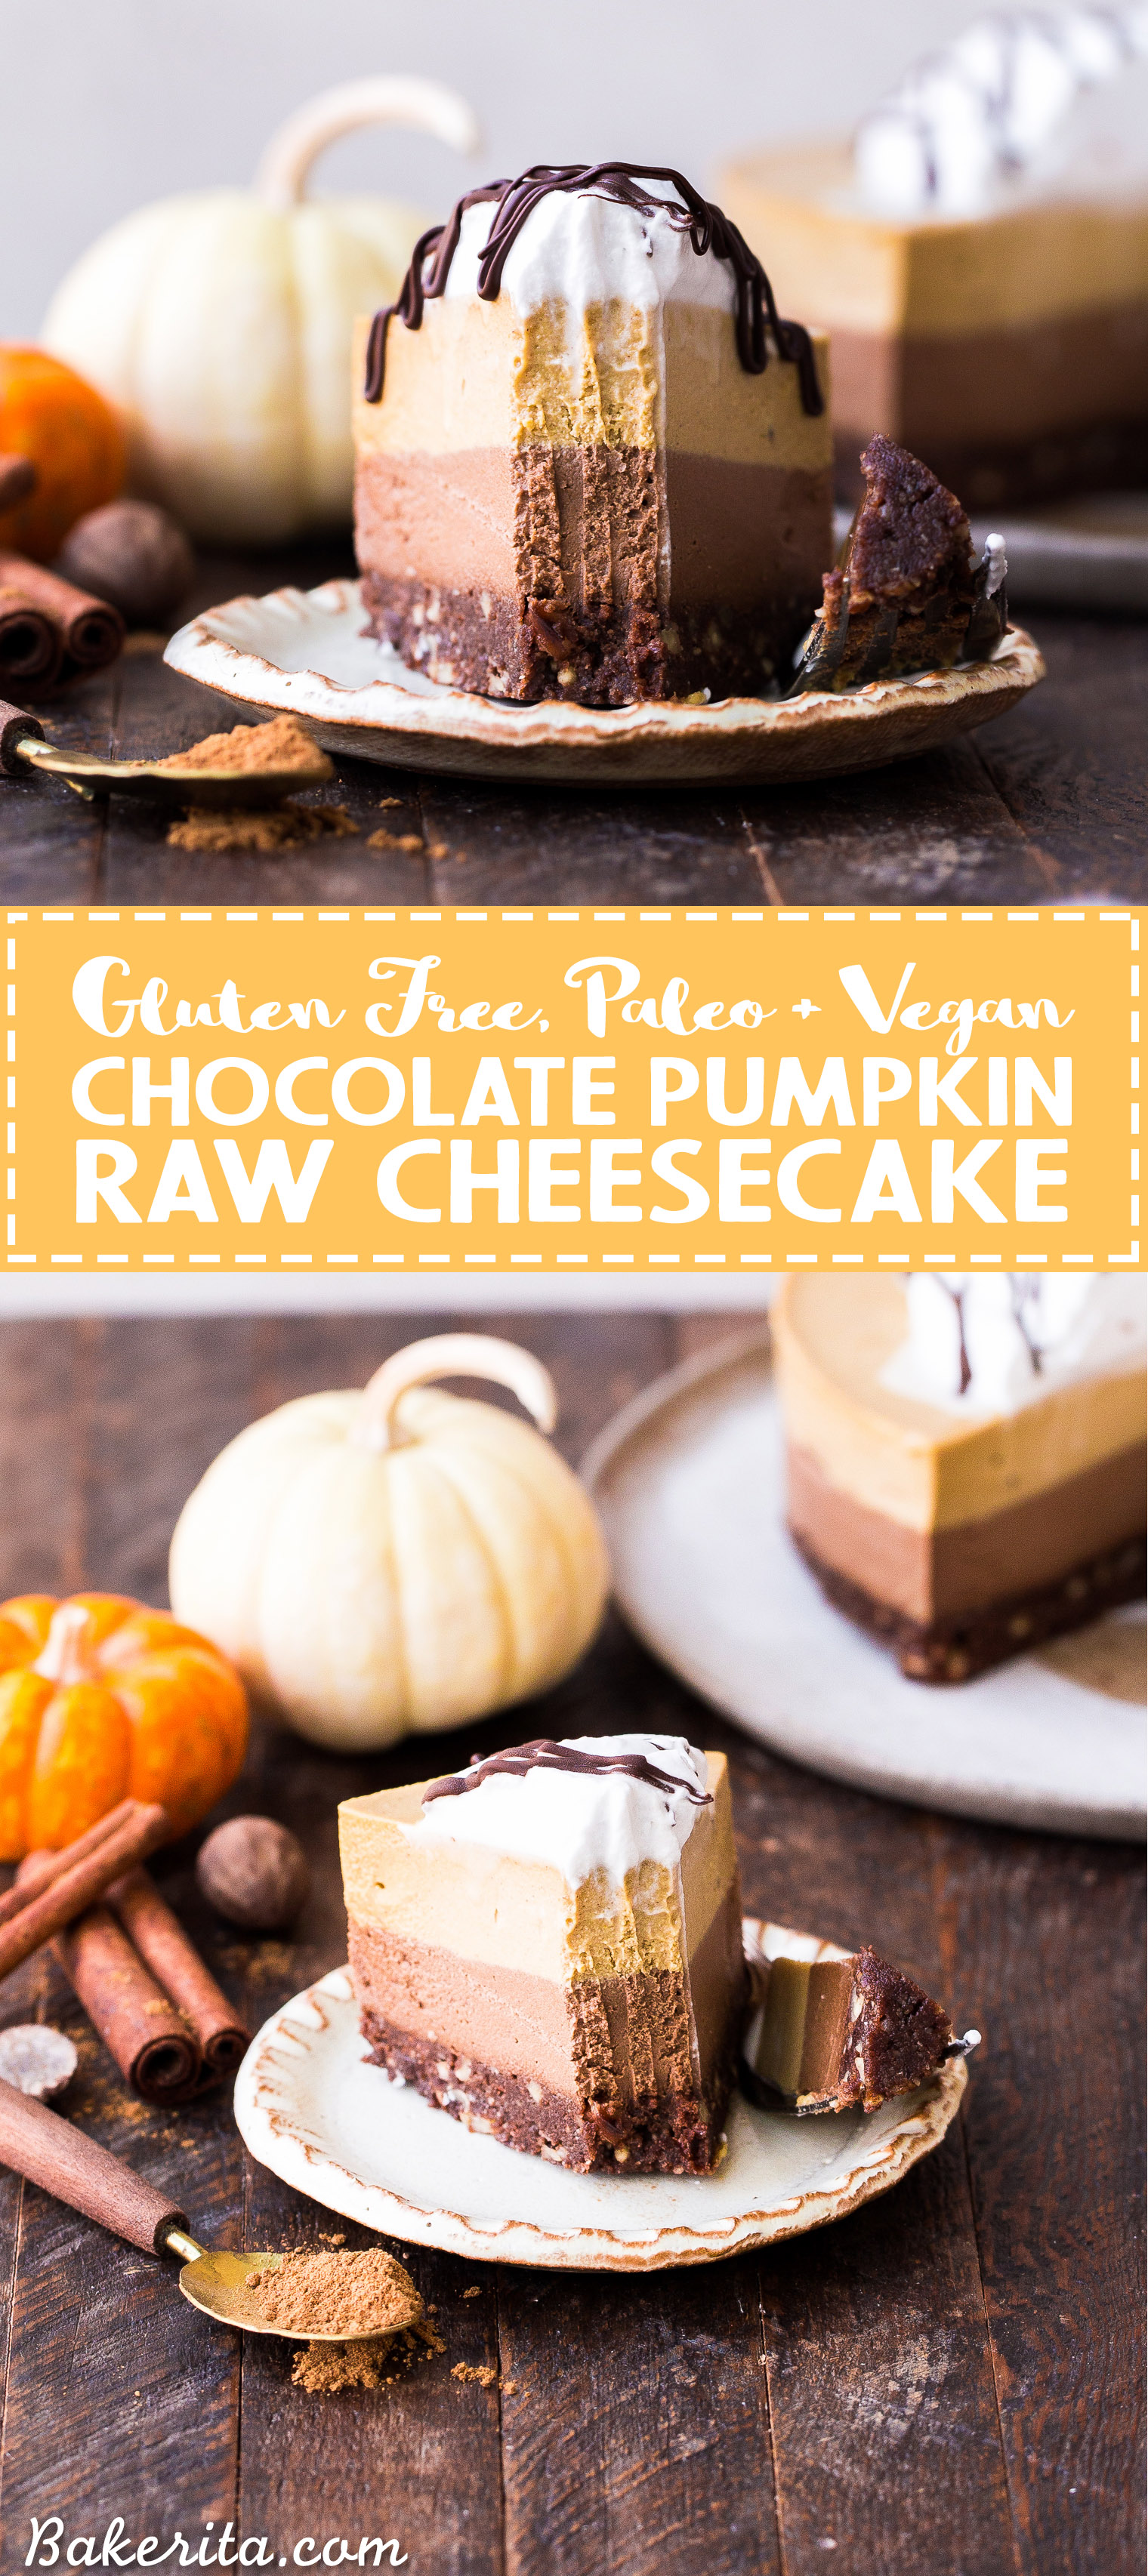 This No-Bake Chocolate Pumpkin Cheesecake has layers of chocolate cashew cheesecake and pumpkin spice cheesecake, on top of a chocolate date crust. This make-ahead raw dessert is perfect for the holidays.